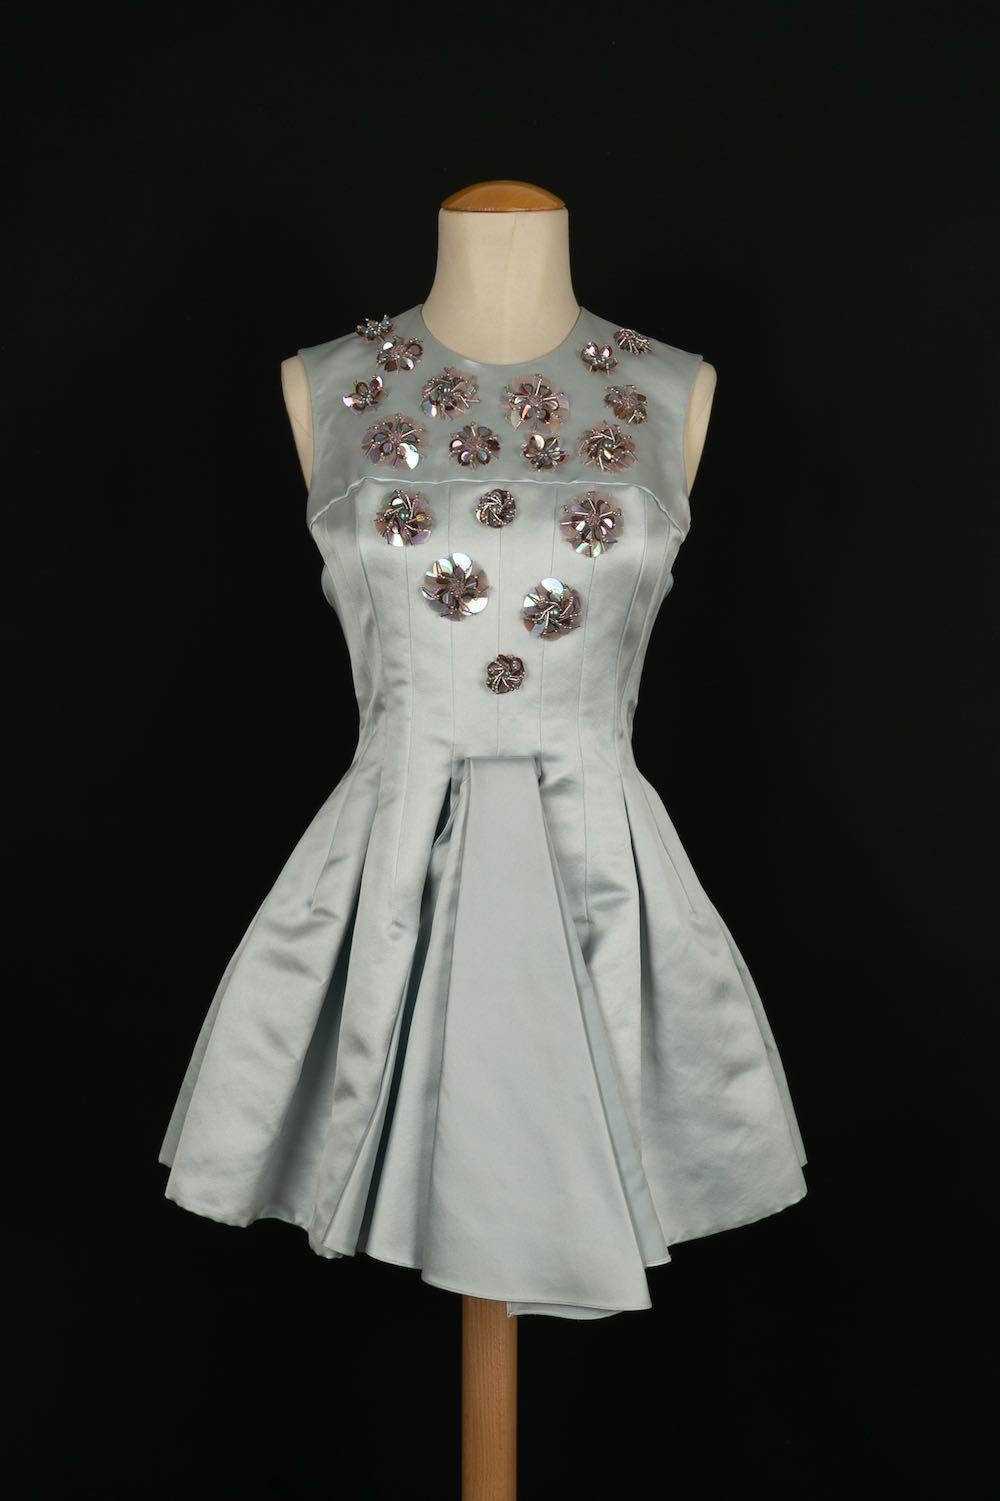 Dior - (Made in France) Mini dress in silk satin and glittery flowers application. Size 34FR.

Additional information:
Dimensions: Chest: 45 cm, Waist: 35 cm, Length: 73 cm
Condition: Good condition
Seller Ref number: VR198